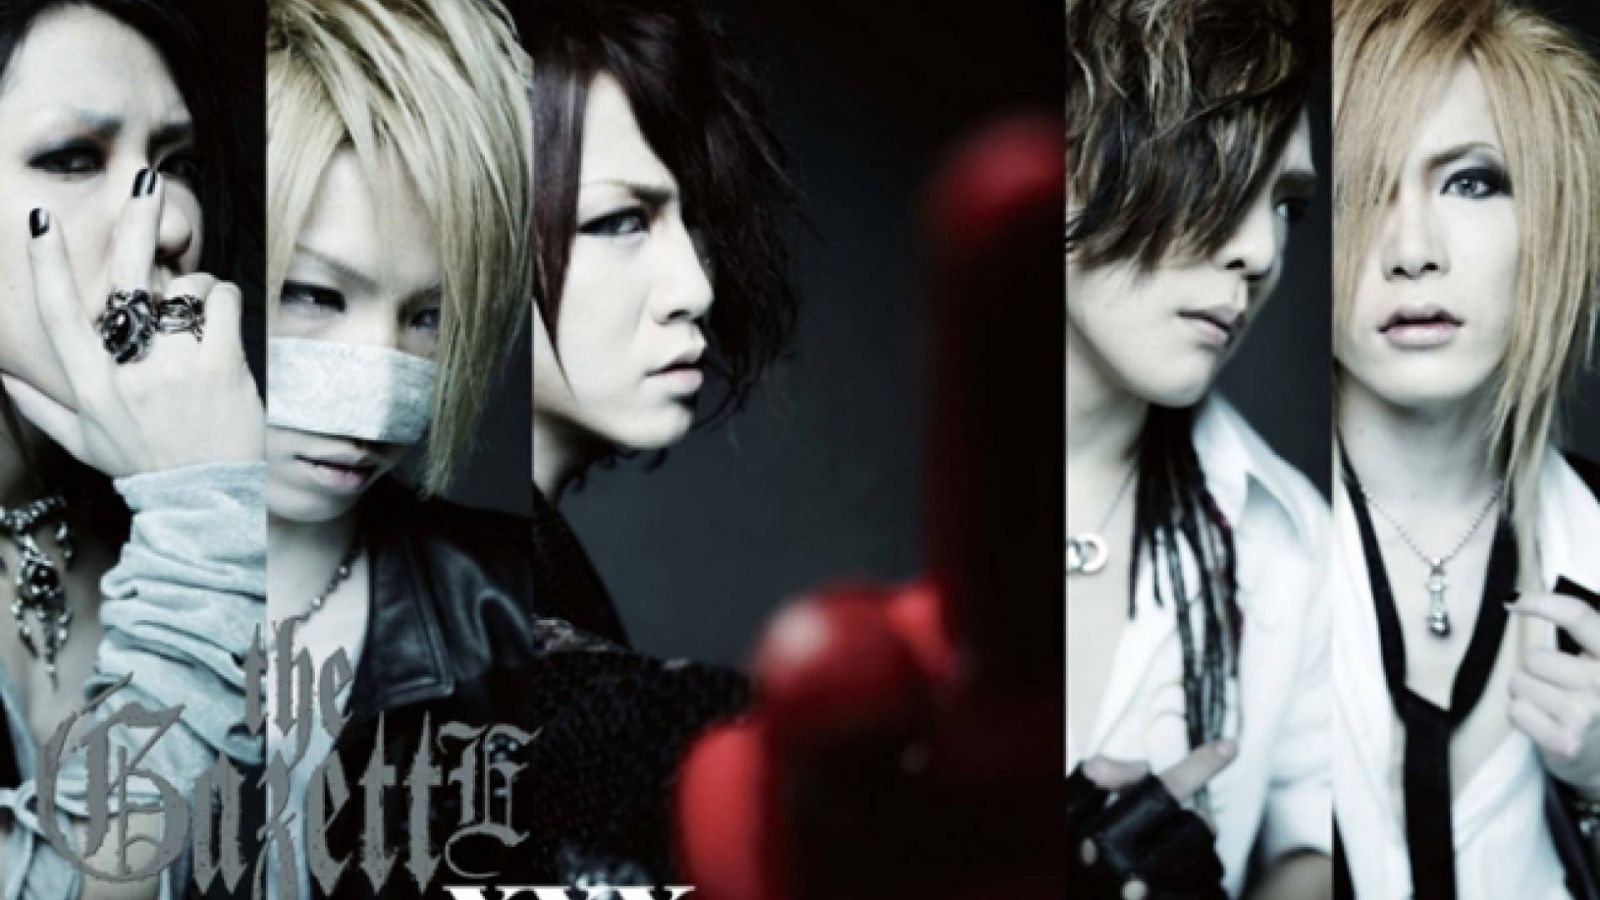 Details of the GazettE's Upcoming Releases © 2009 Zy.connection Inc. All Rights Reserved.